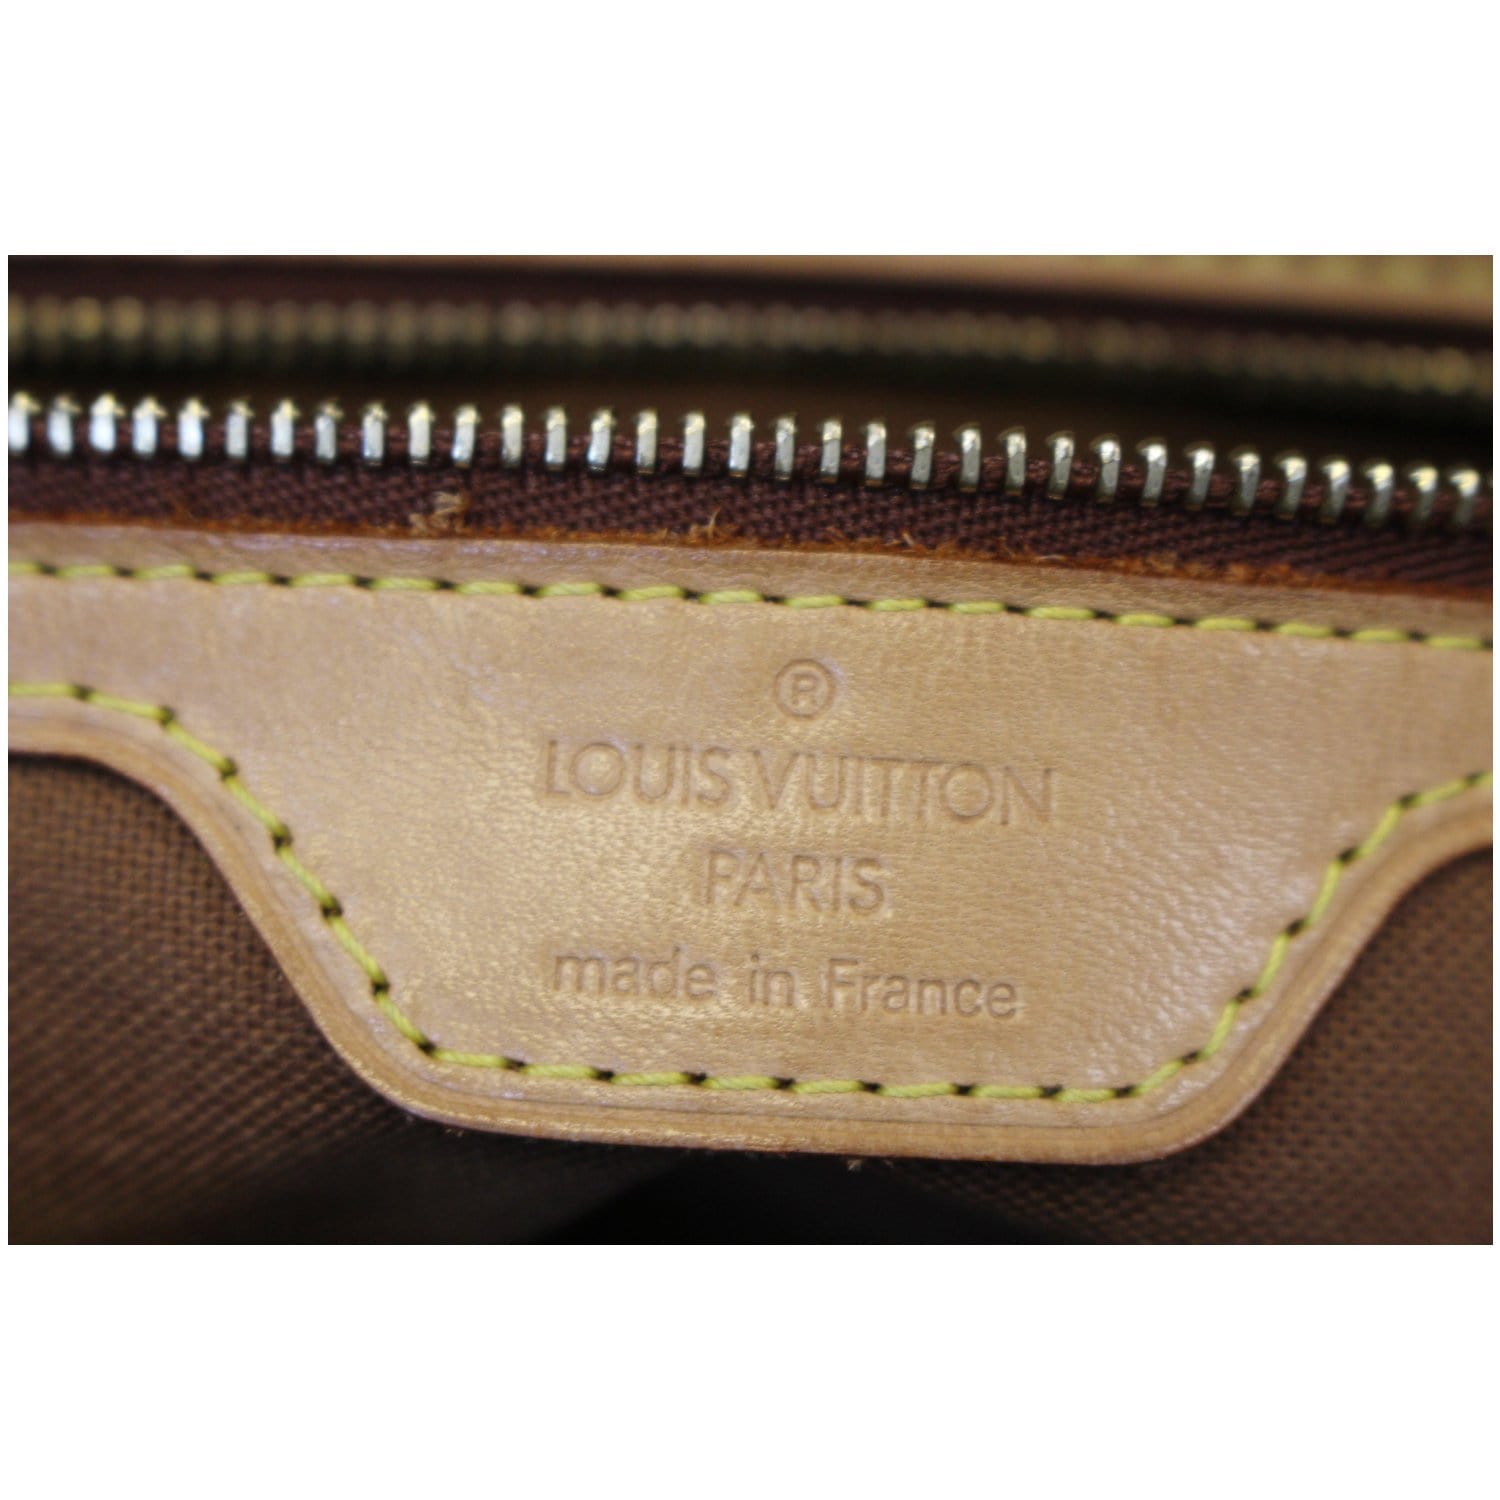 Louis Vuitton Cabas Piano #luxury #highend #resell #louisvuitton